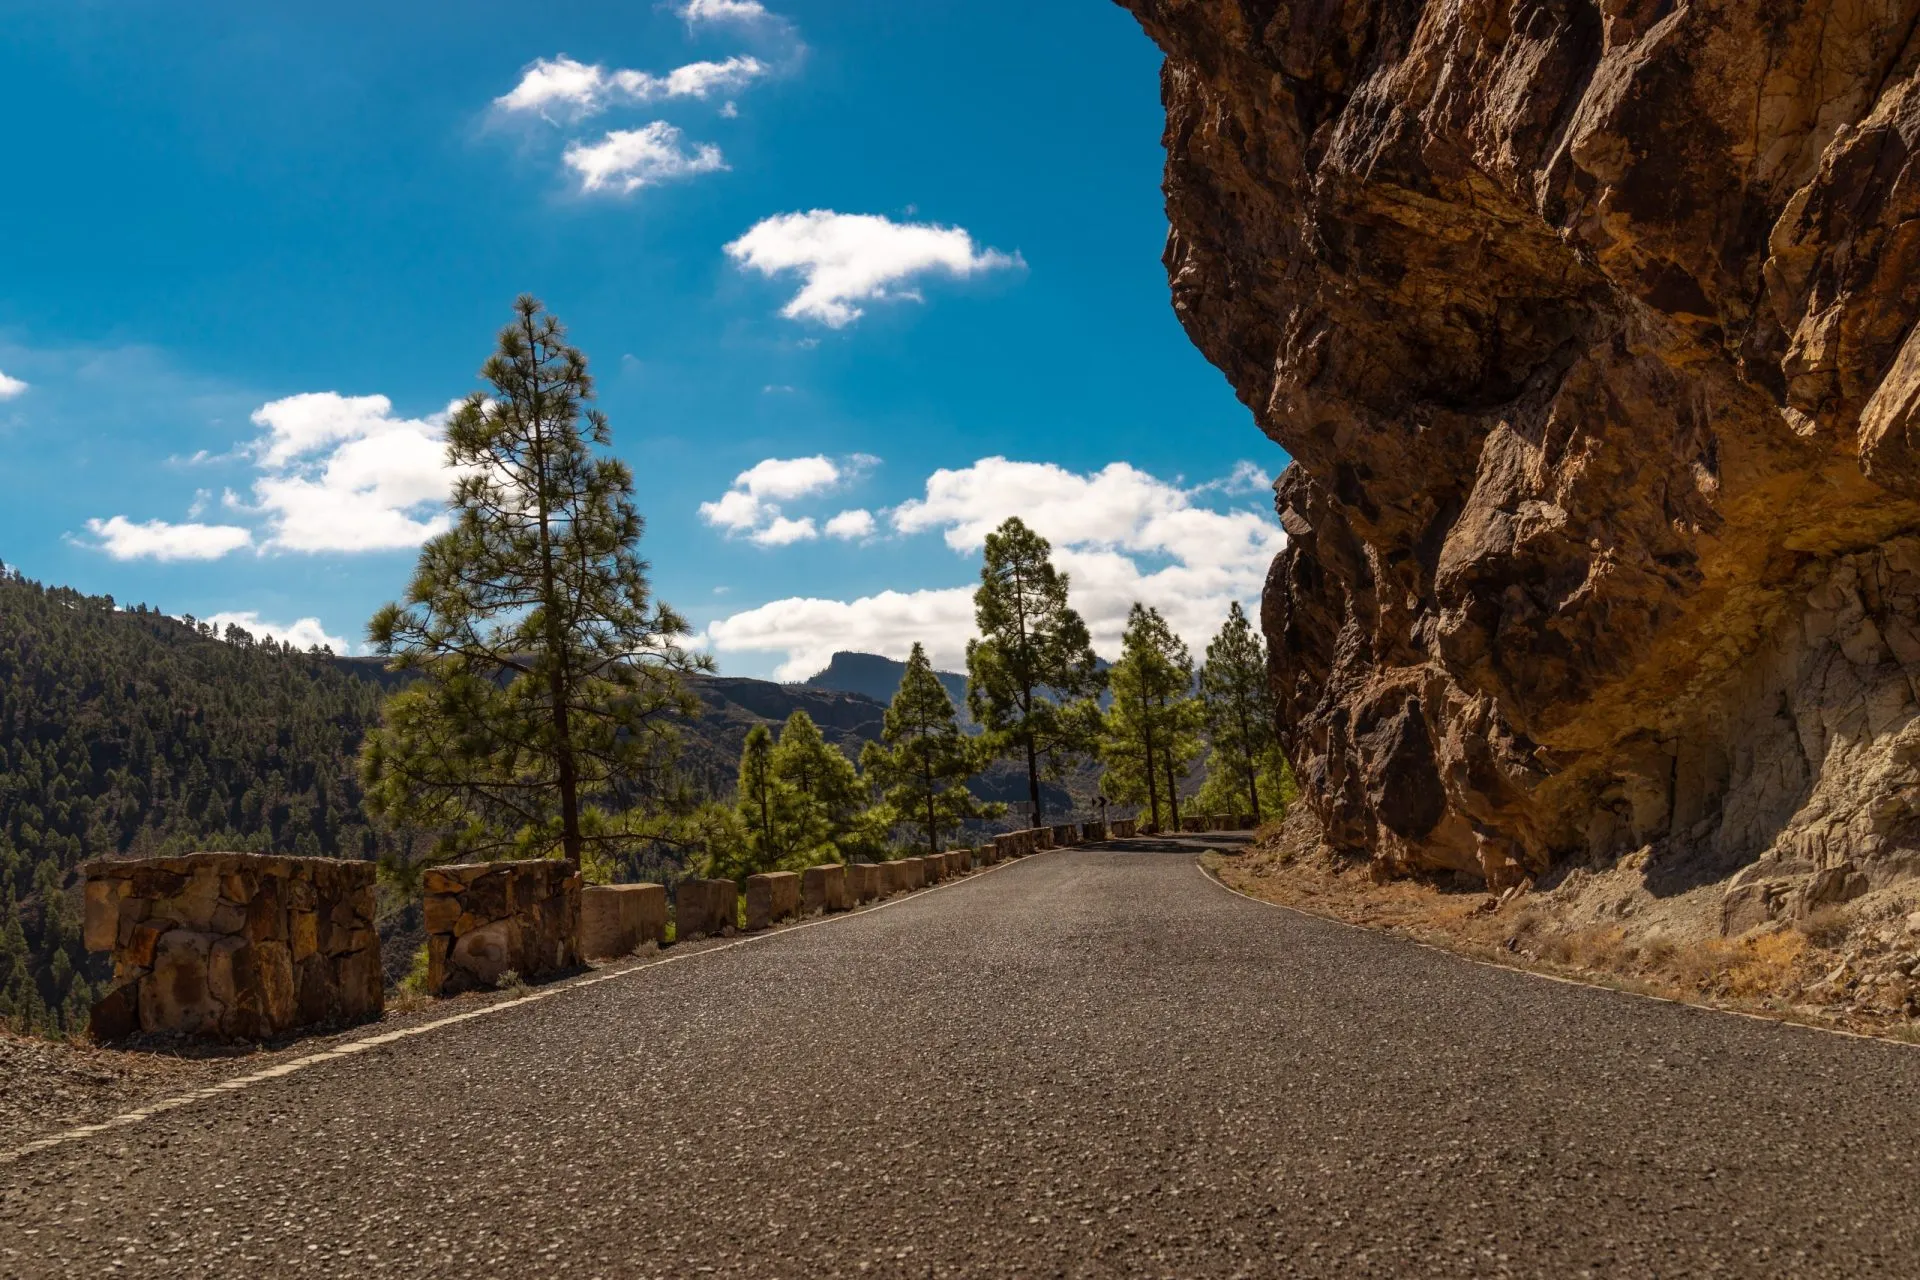 Spain, The Canary Islands, Gran Canaria, serpentin road in the mountains